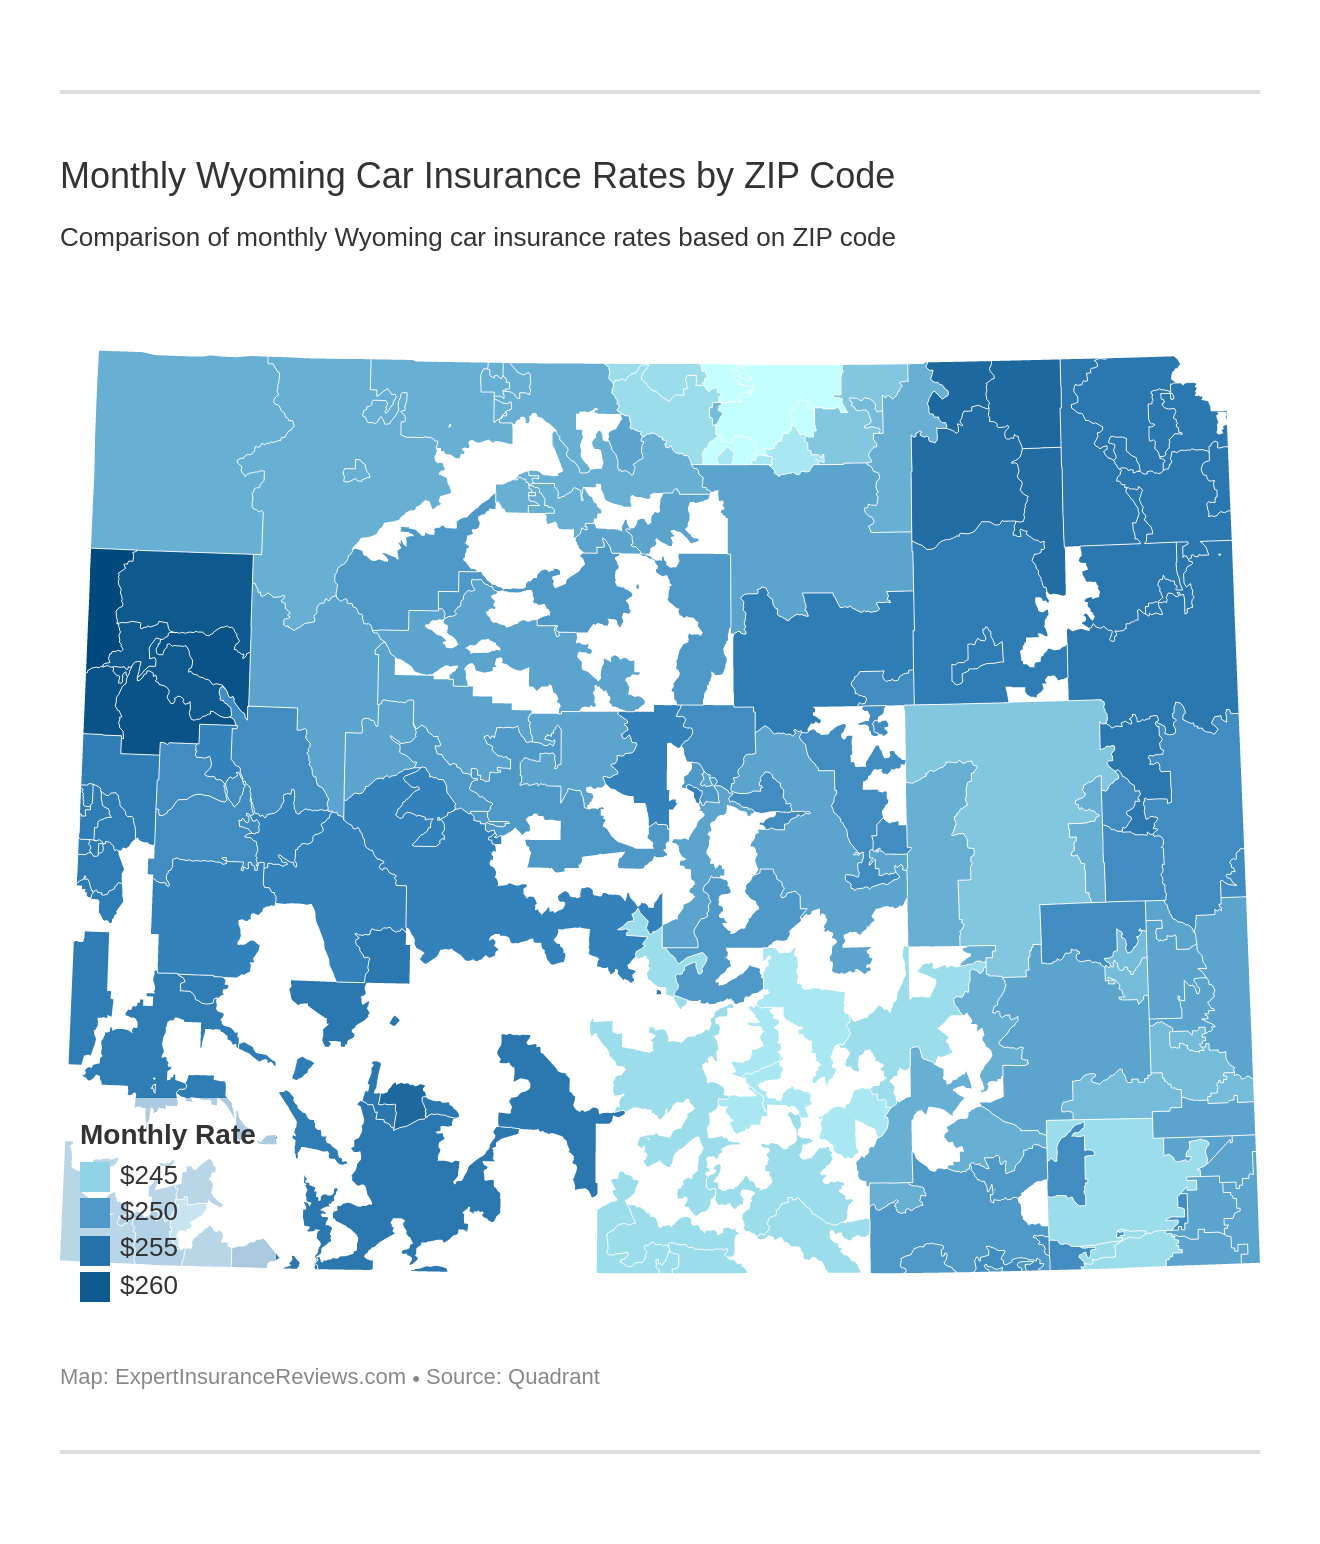 Monthly Wyoming Car Insurance Rates by ZIP Code